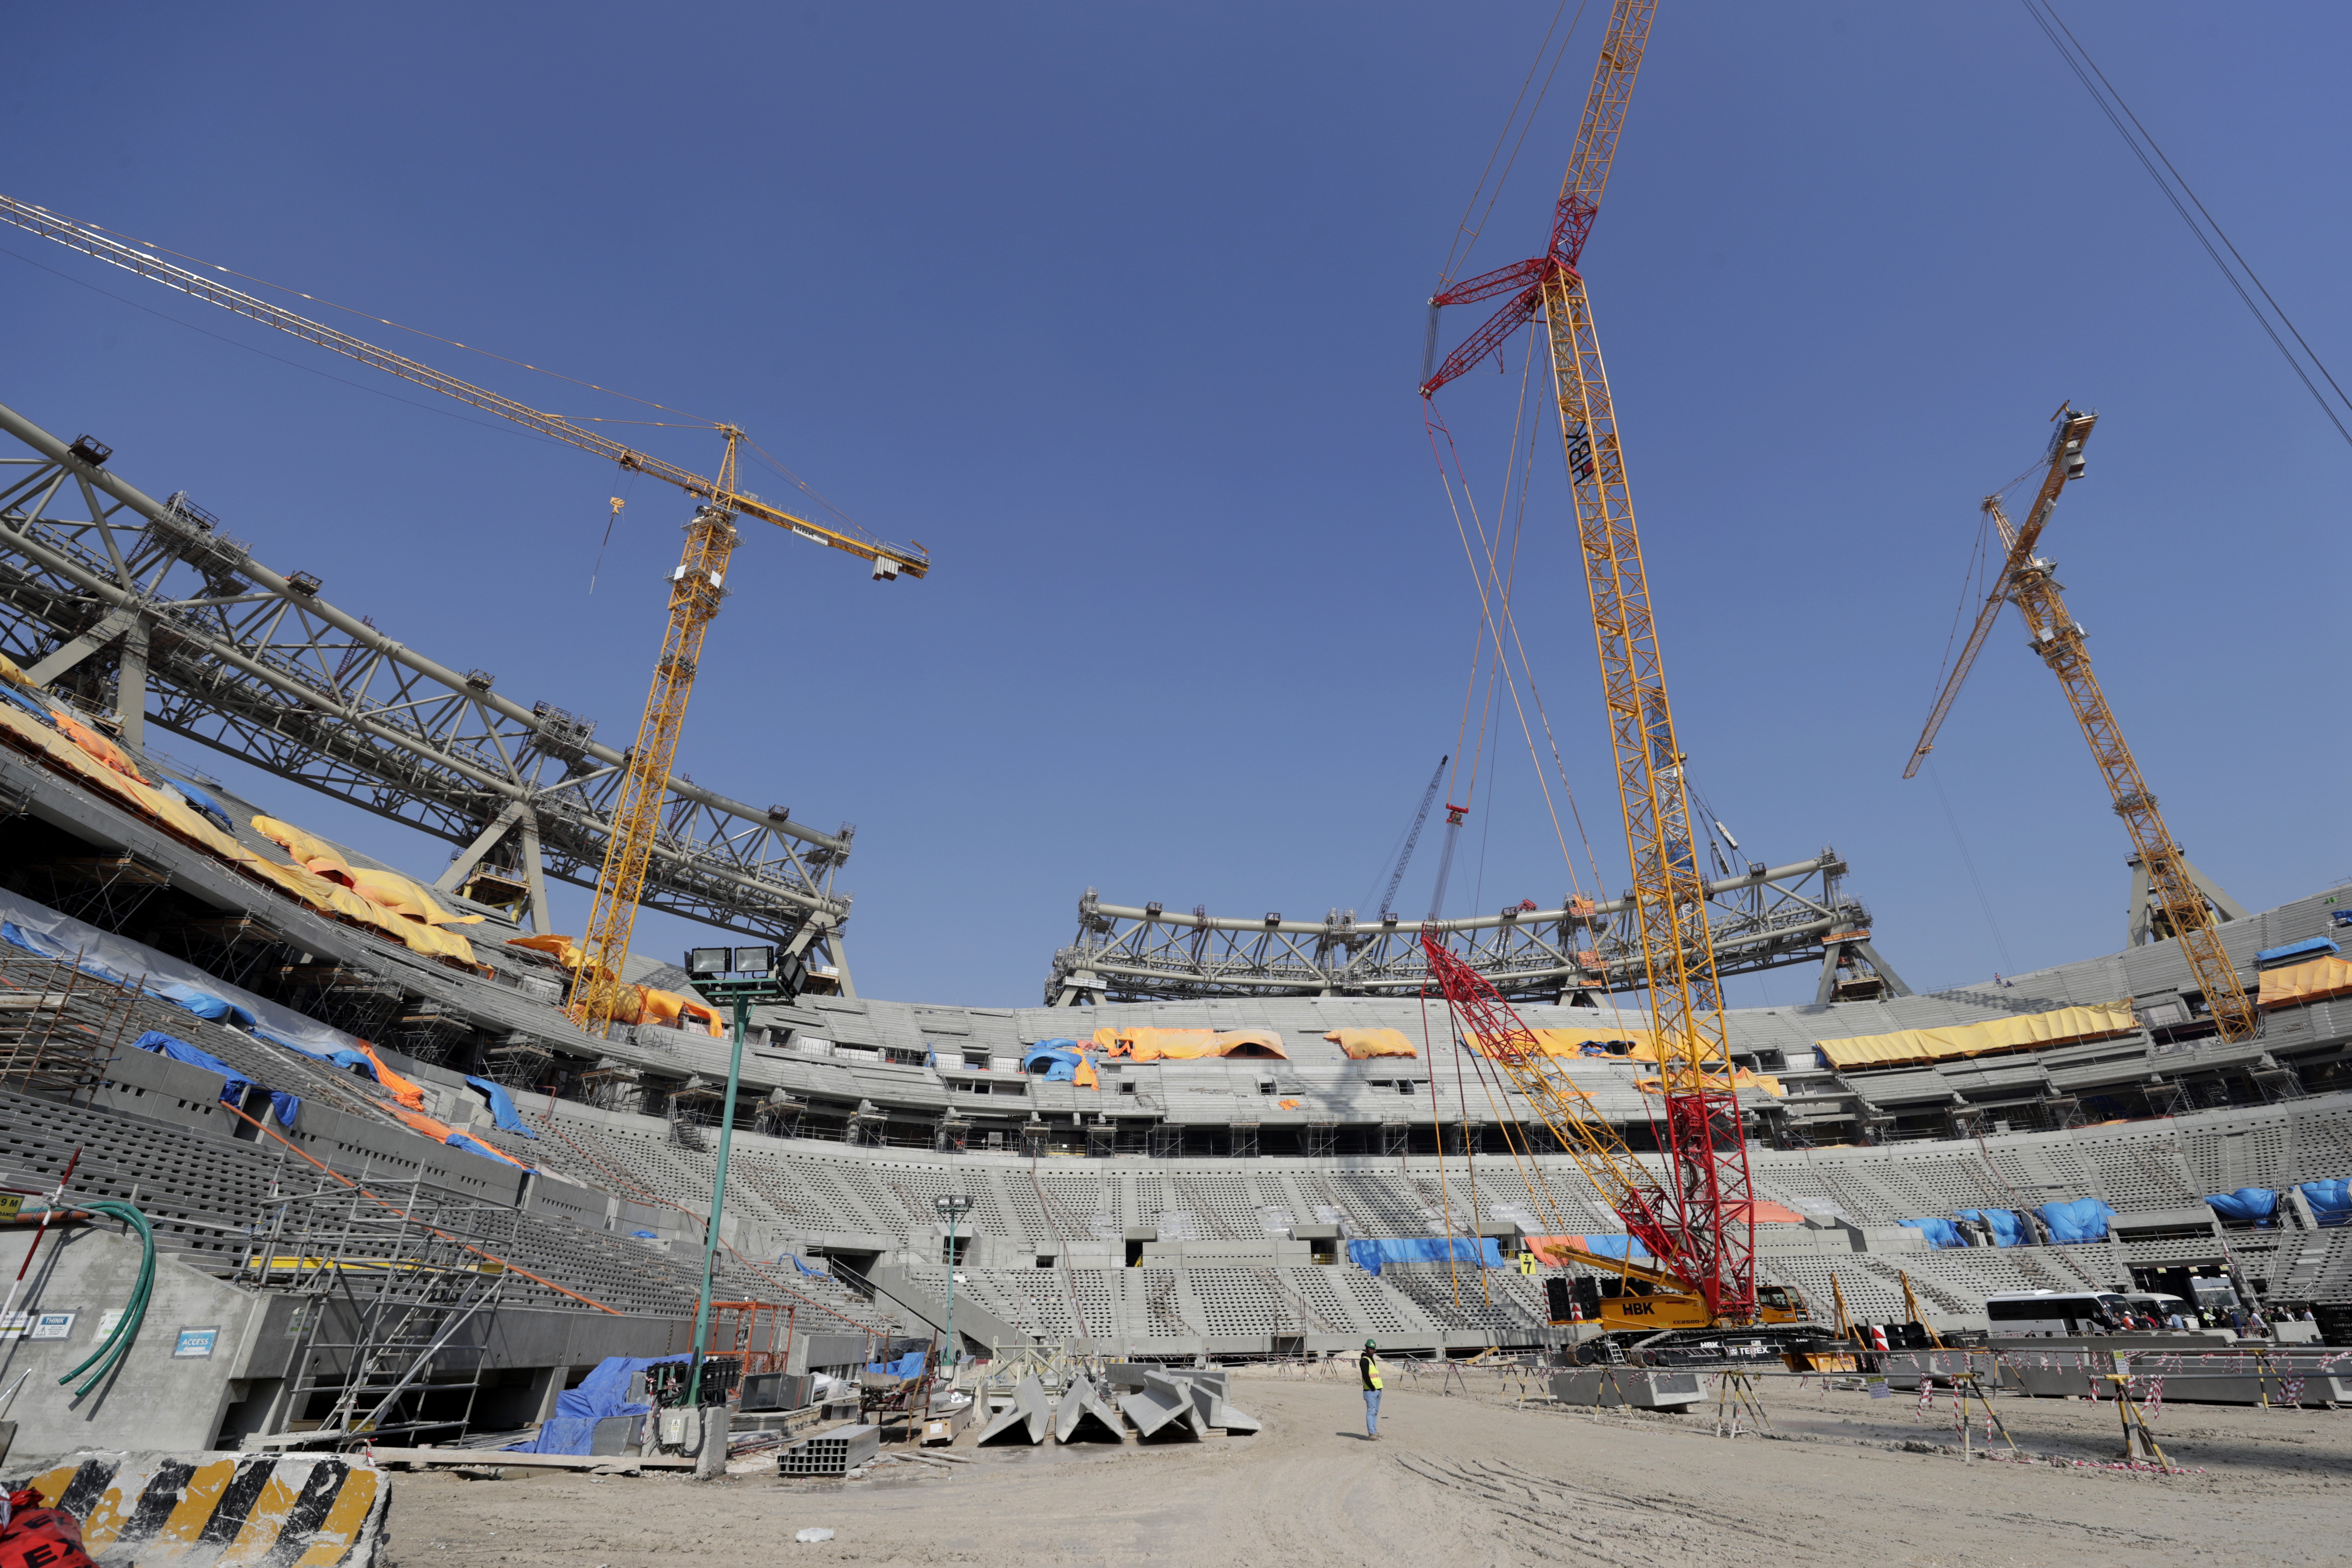 Workers work at Lusail Stadium, one of the 2022 World Cup stadiums, in Lusail, Qatar, Friday, Dec. 20, 2019. Construction is underway to complete Lusail's 80,000-seat venue for the opening game and final in a city that didn't exist when Qatar won the FIFA vote in 2010. (AP Photo/Hassan Ammar)